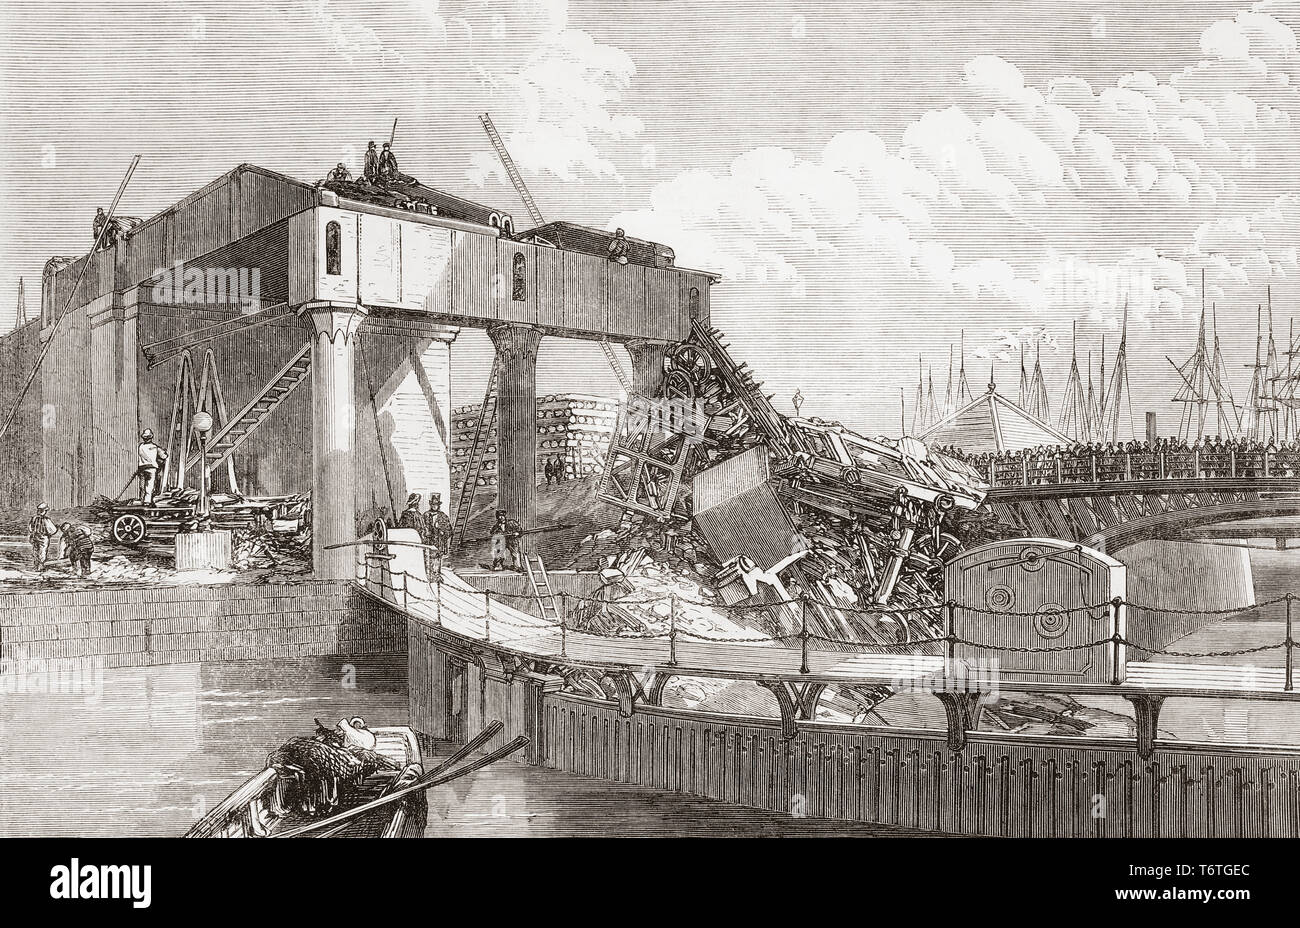 Scene of the railway accident of a coal train at the entrance to North Dock, Swansea, Wales due to a signaller error, 1865.  From The Illustrated London News, published 1865. Stock Photo